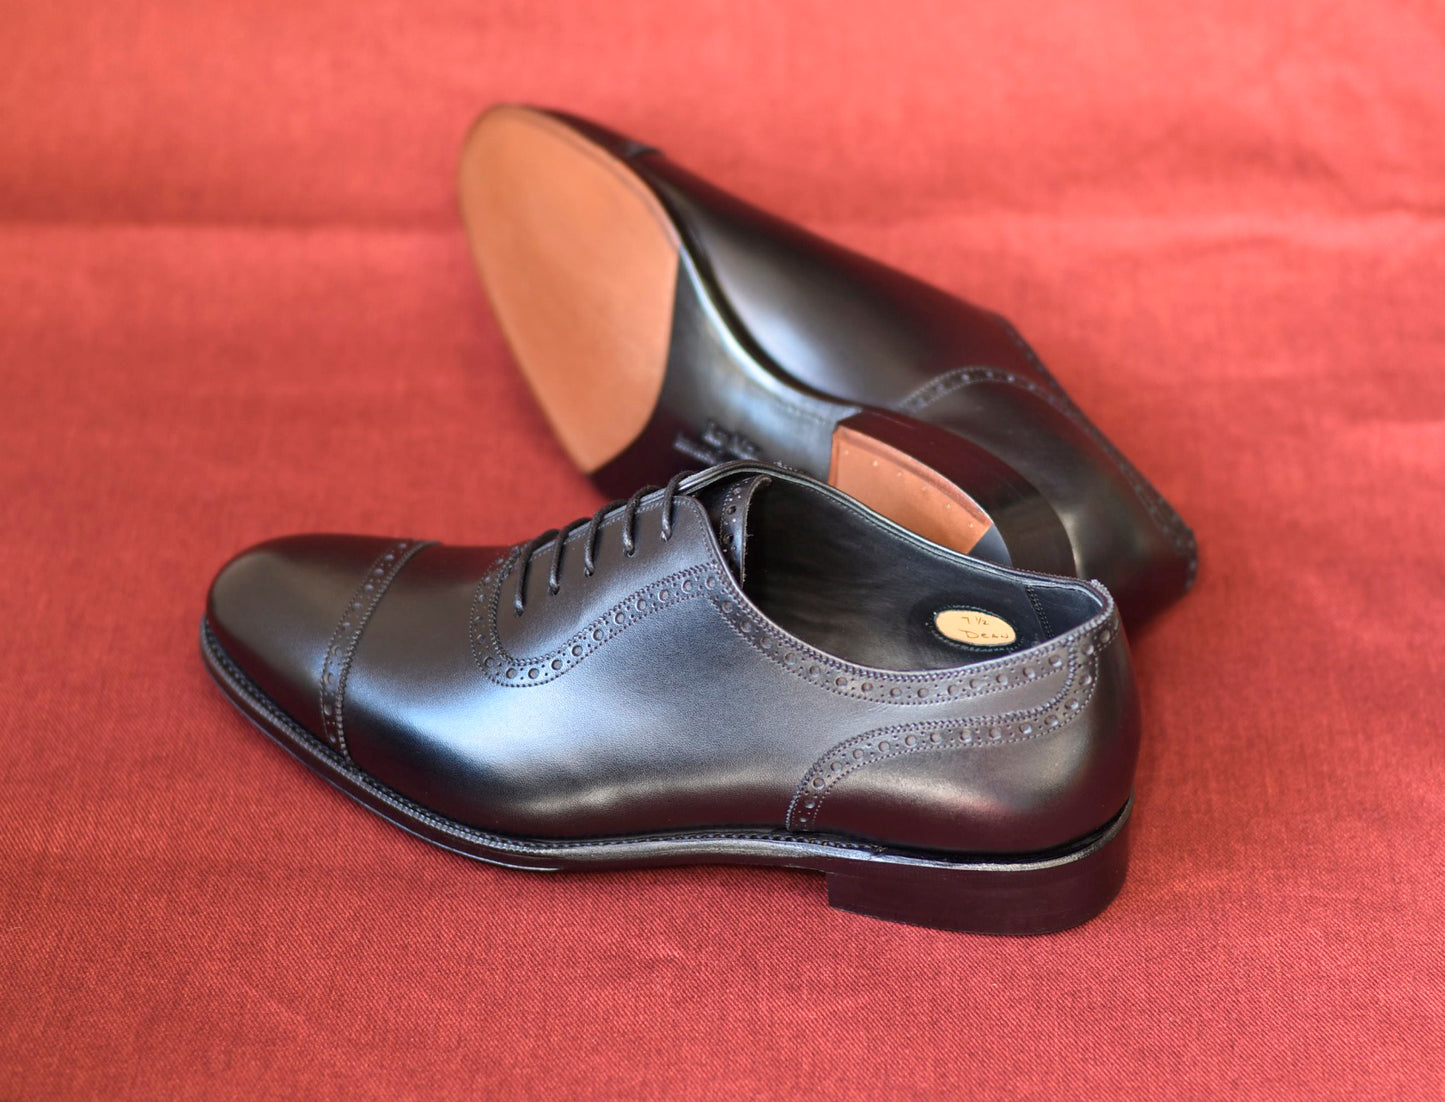 “Dean” Adelaide, Black Dress Shoes,  Annonay Vocalou, Hand welted, US size 5 1/2 ~ 10